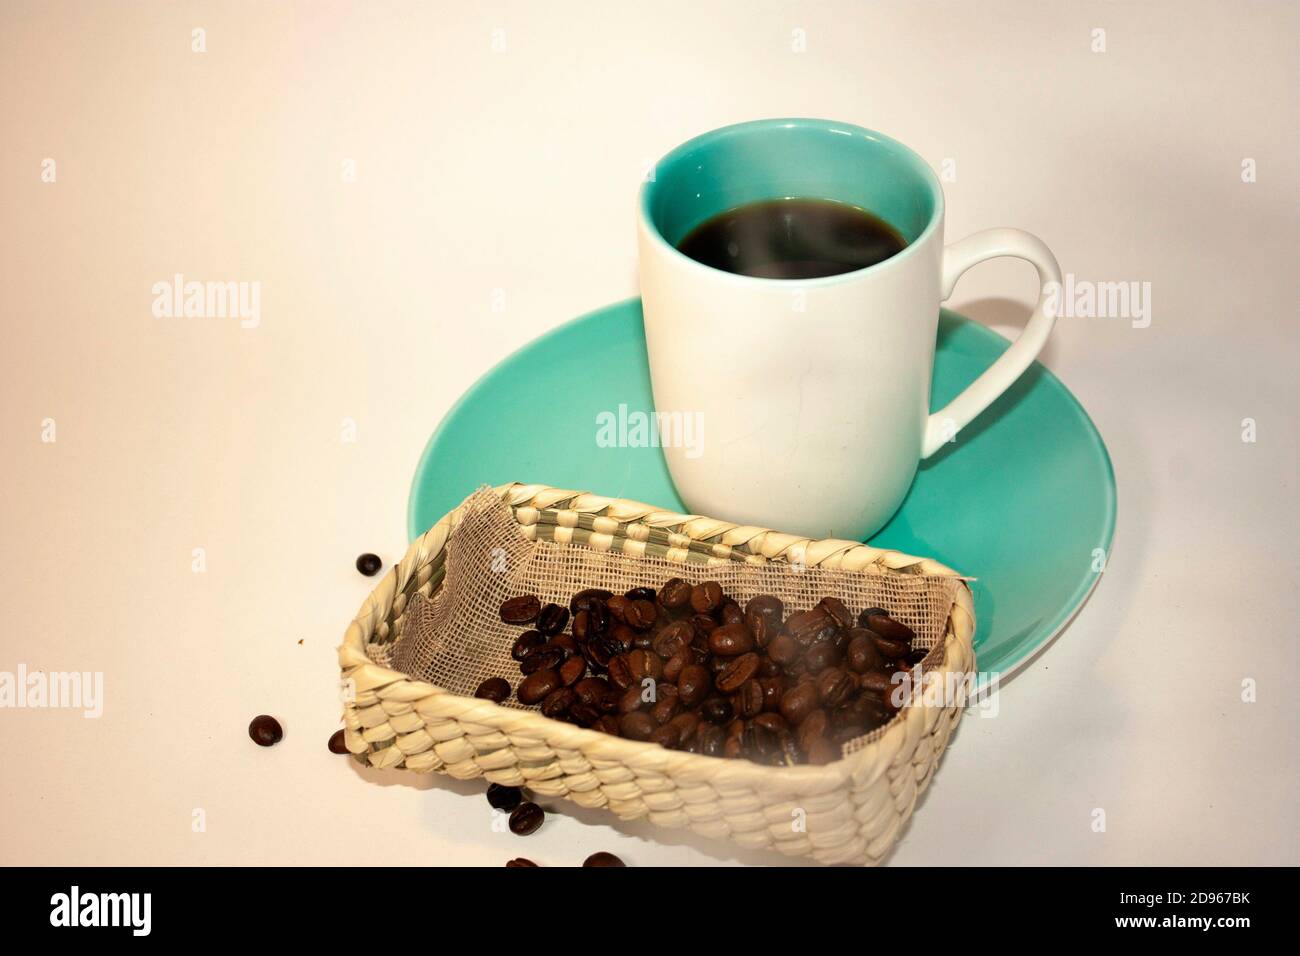 Cup Glass Of Coffee With Smoke And Coffee Beans On Old Wooden